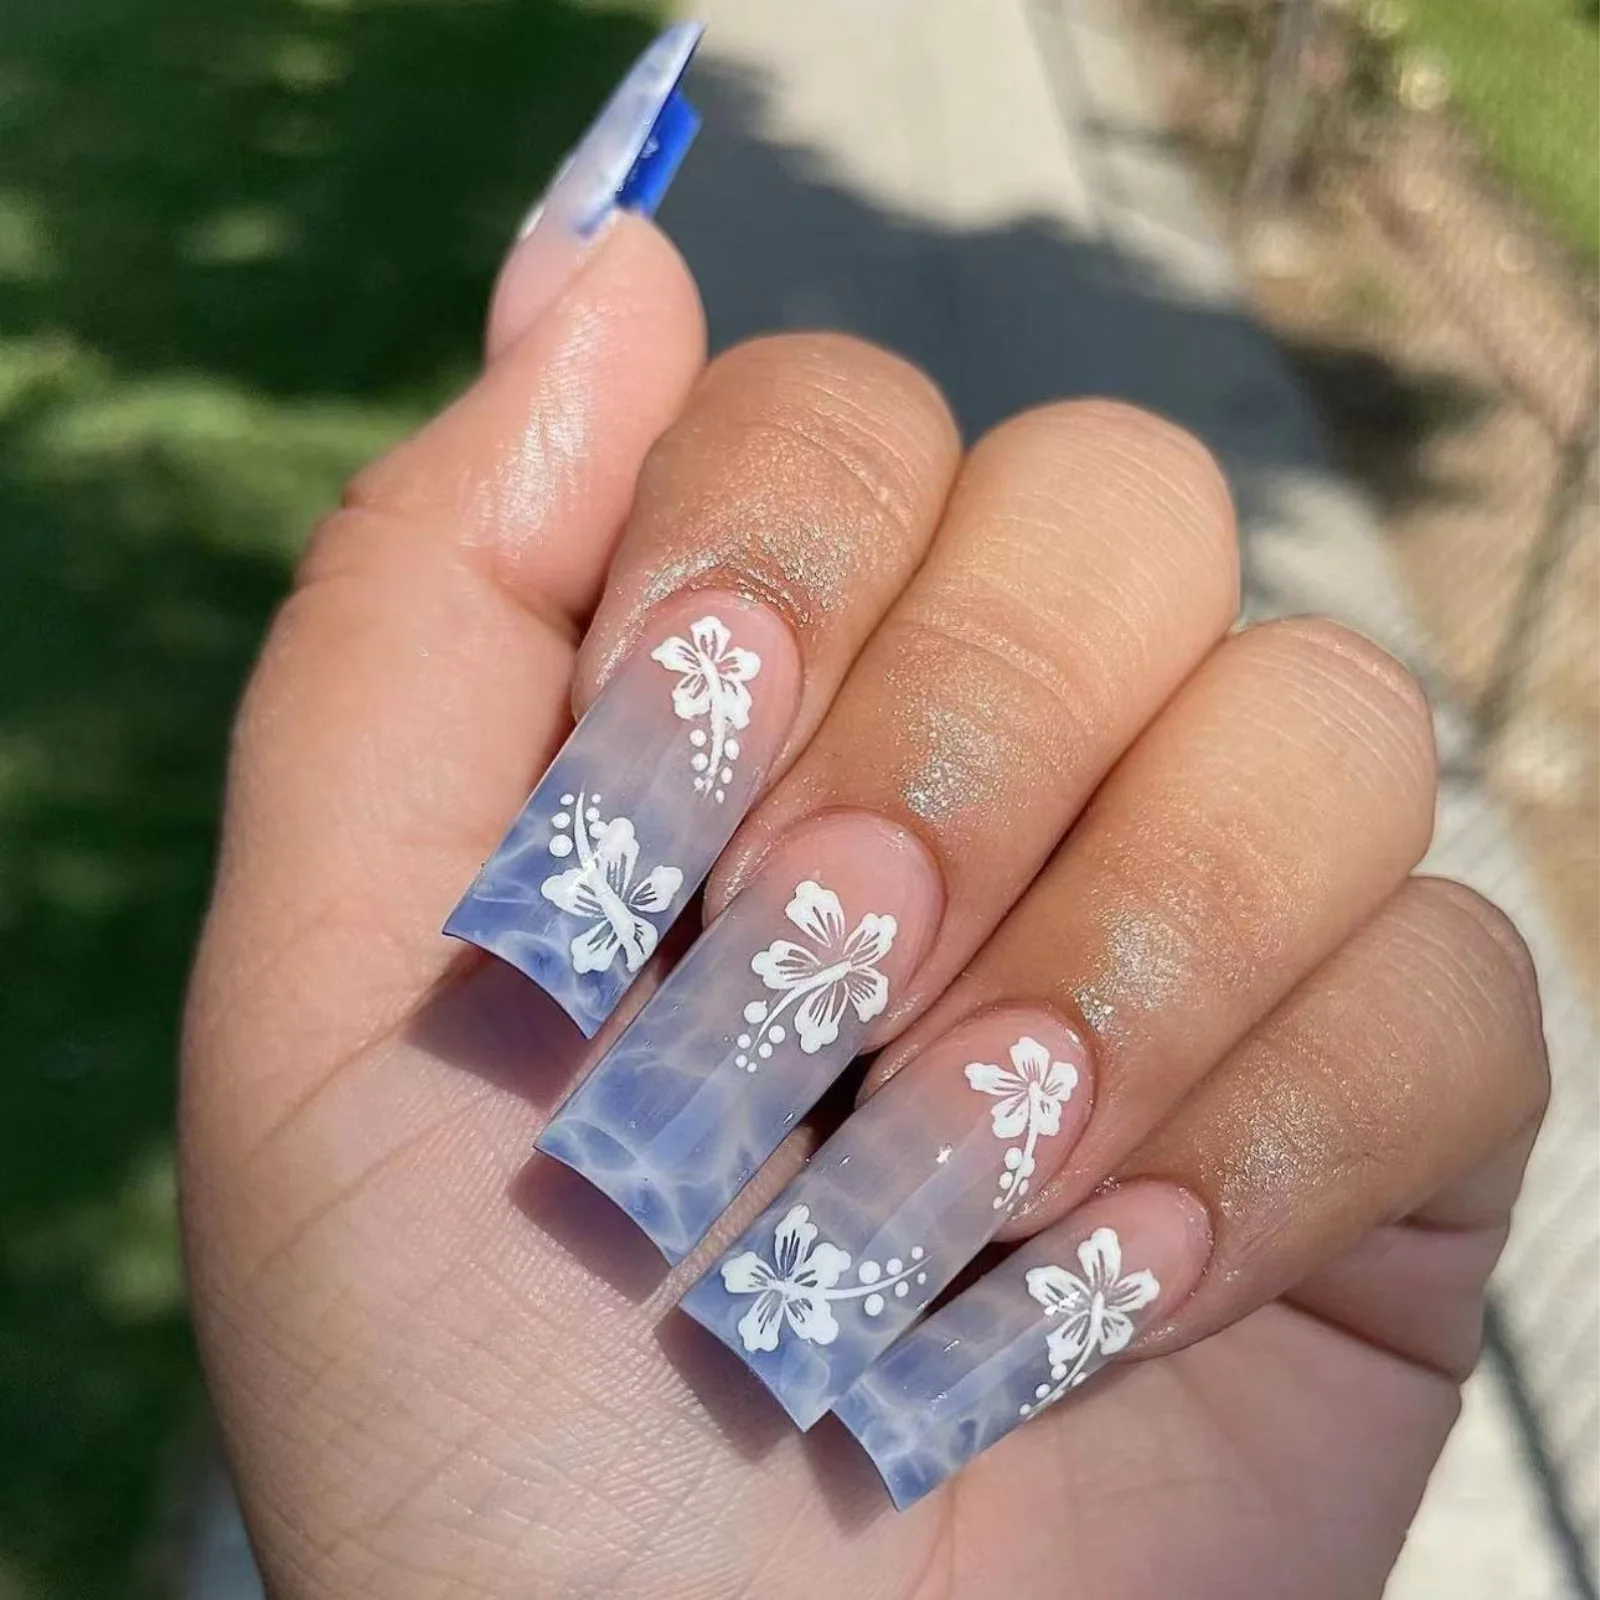 Get Beach Vibes Nails for Less – Summer Savings on Trendy Nail Designs.